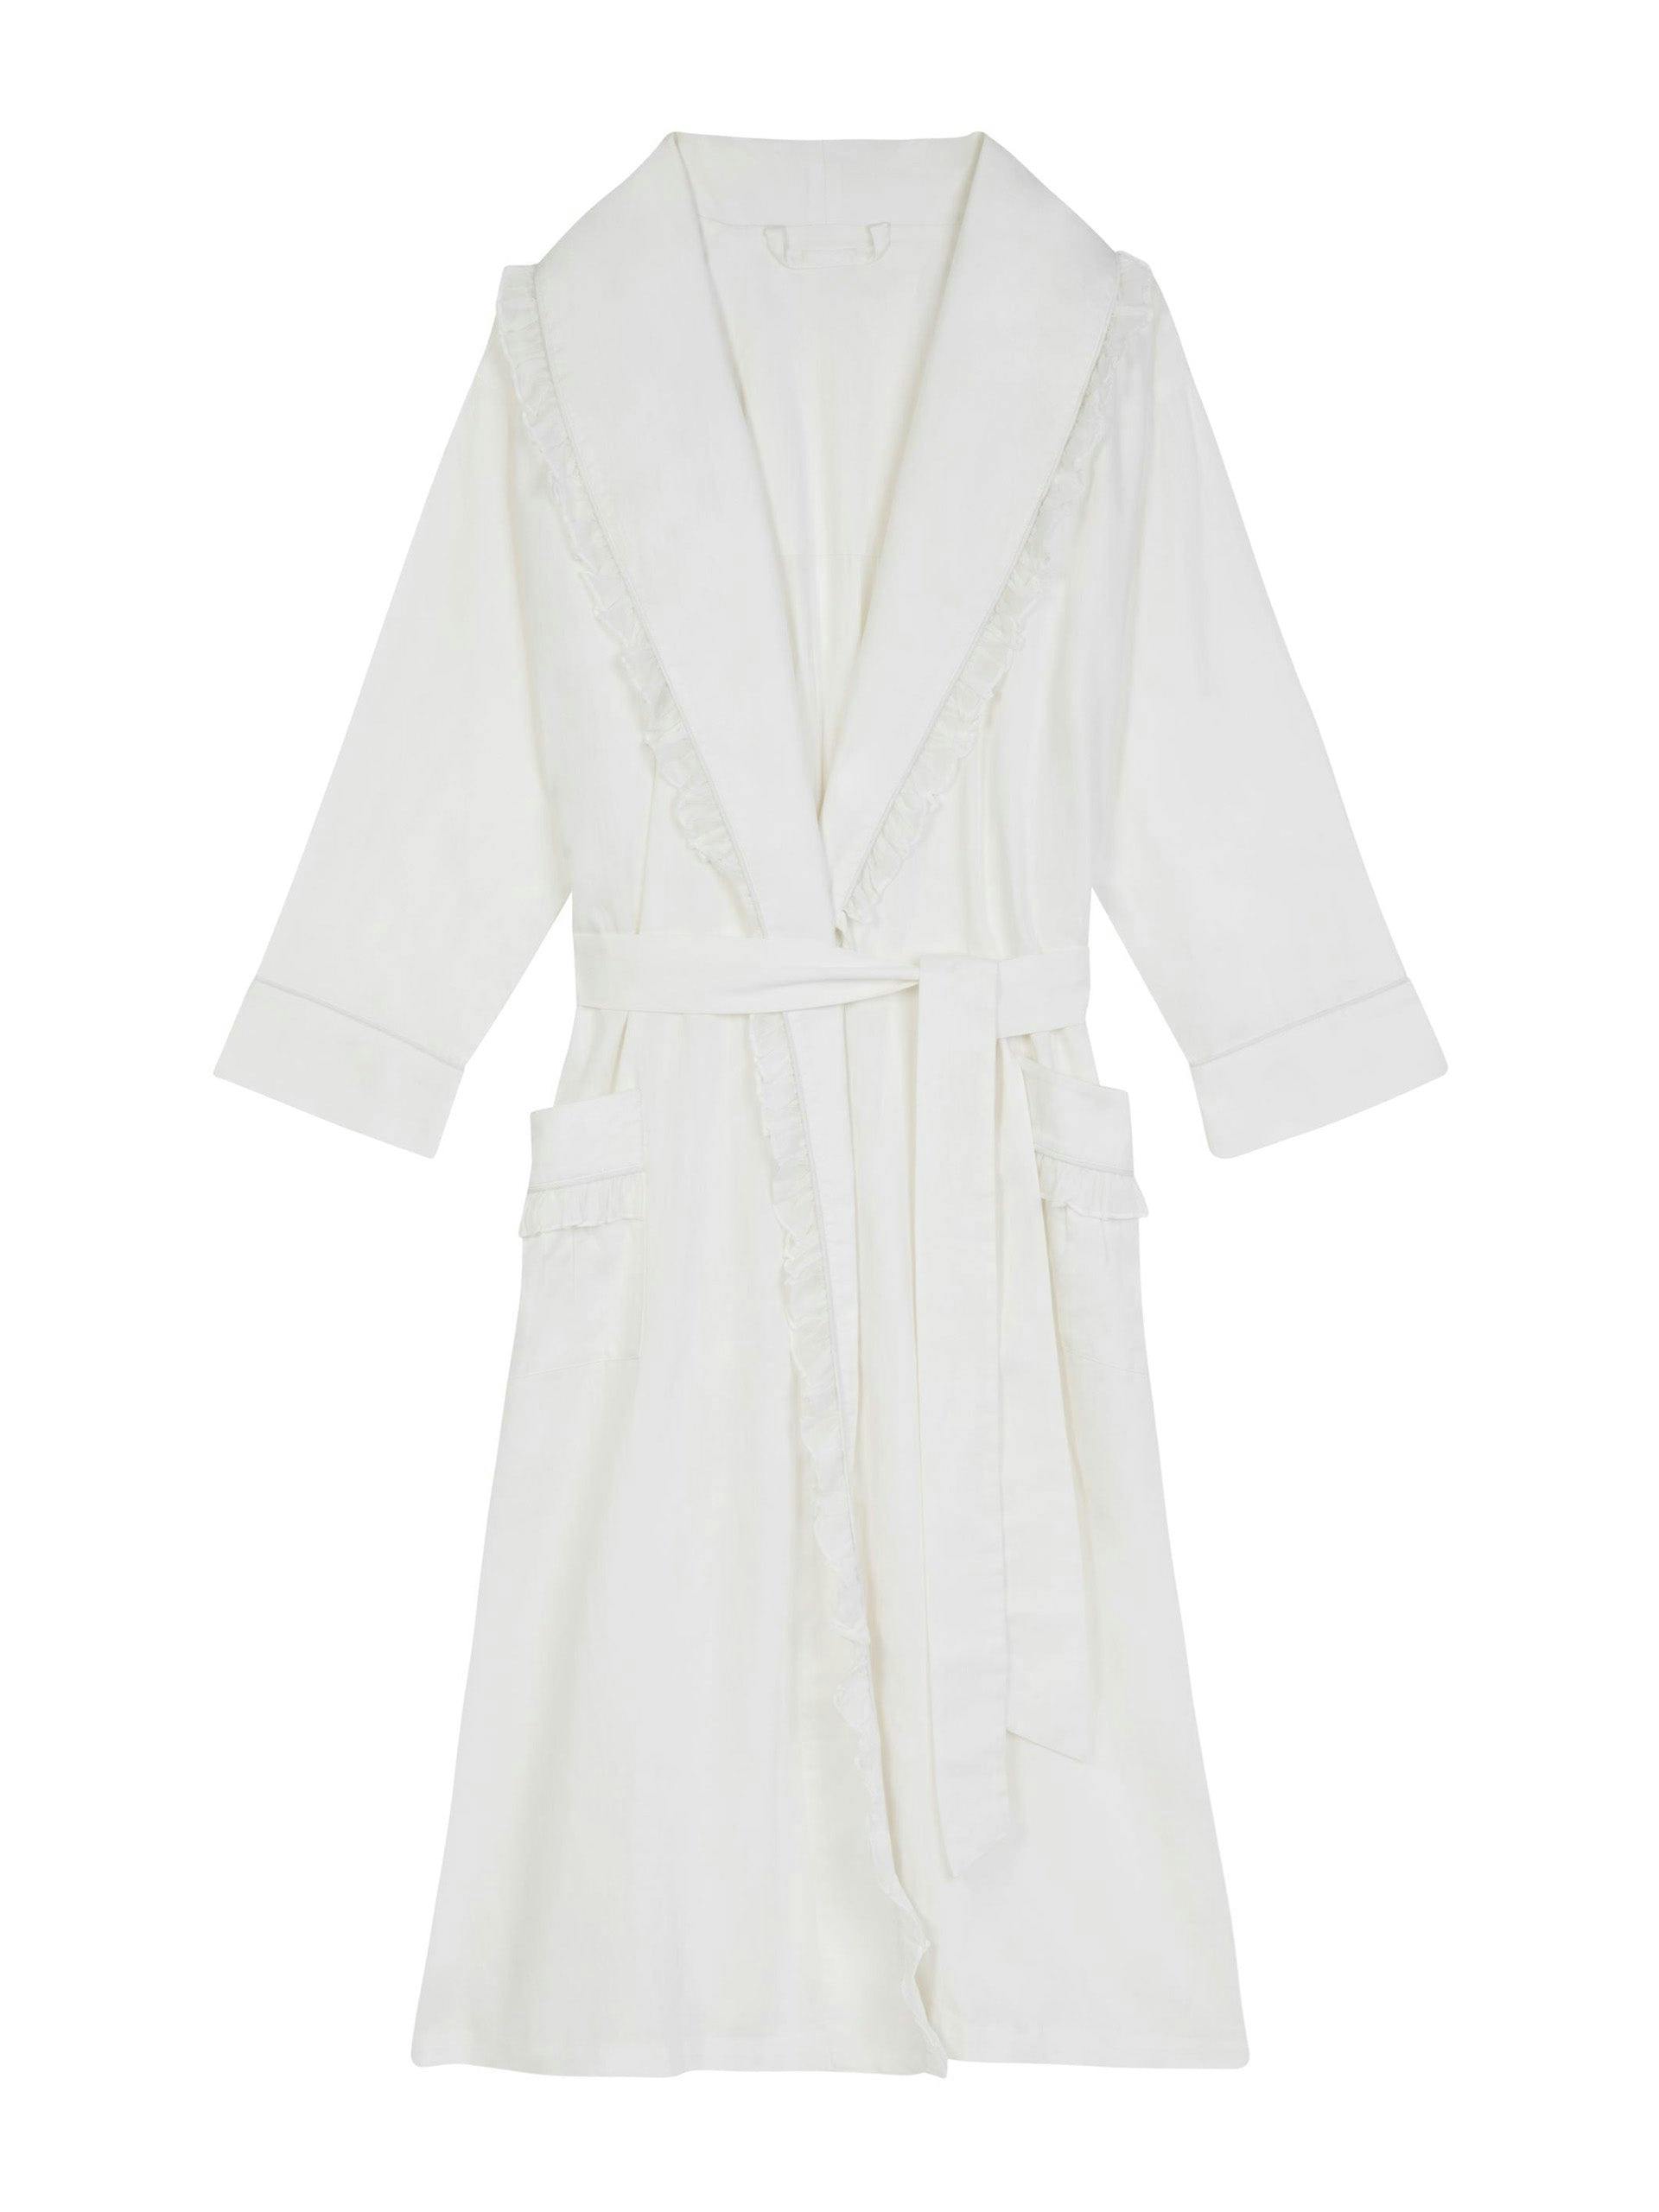 Clotted cream cotton Pippy dressing gown